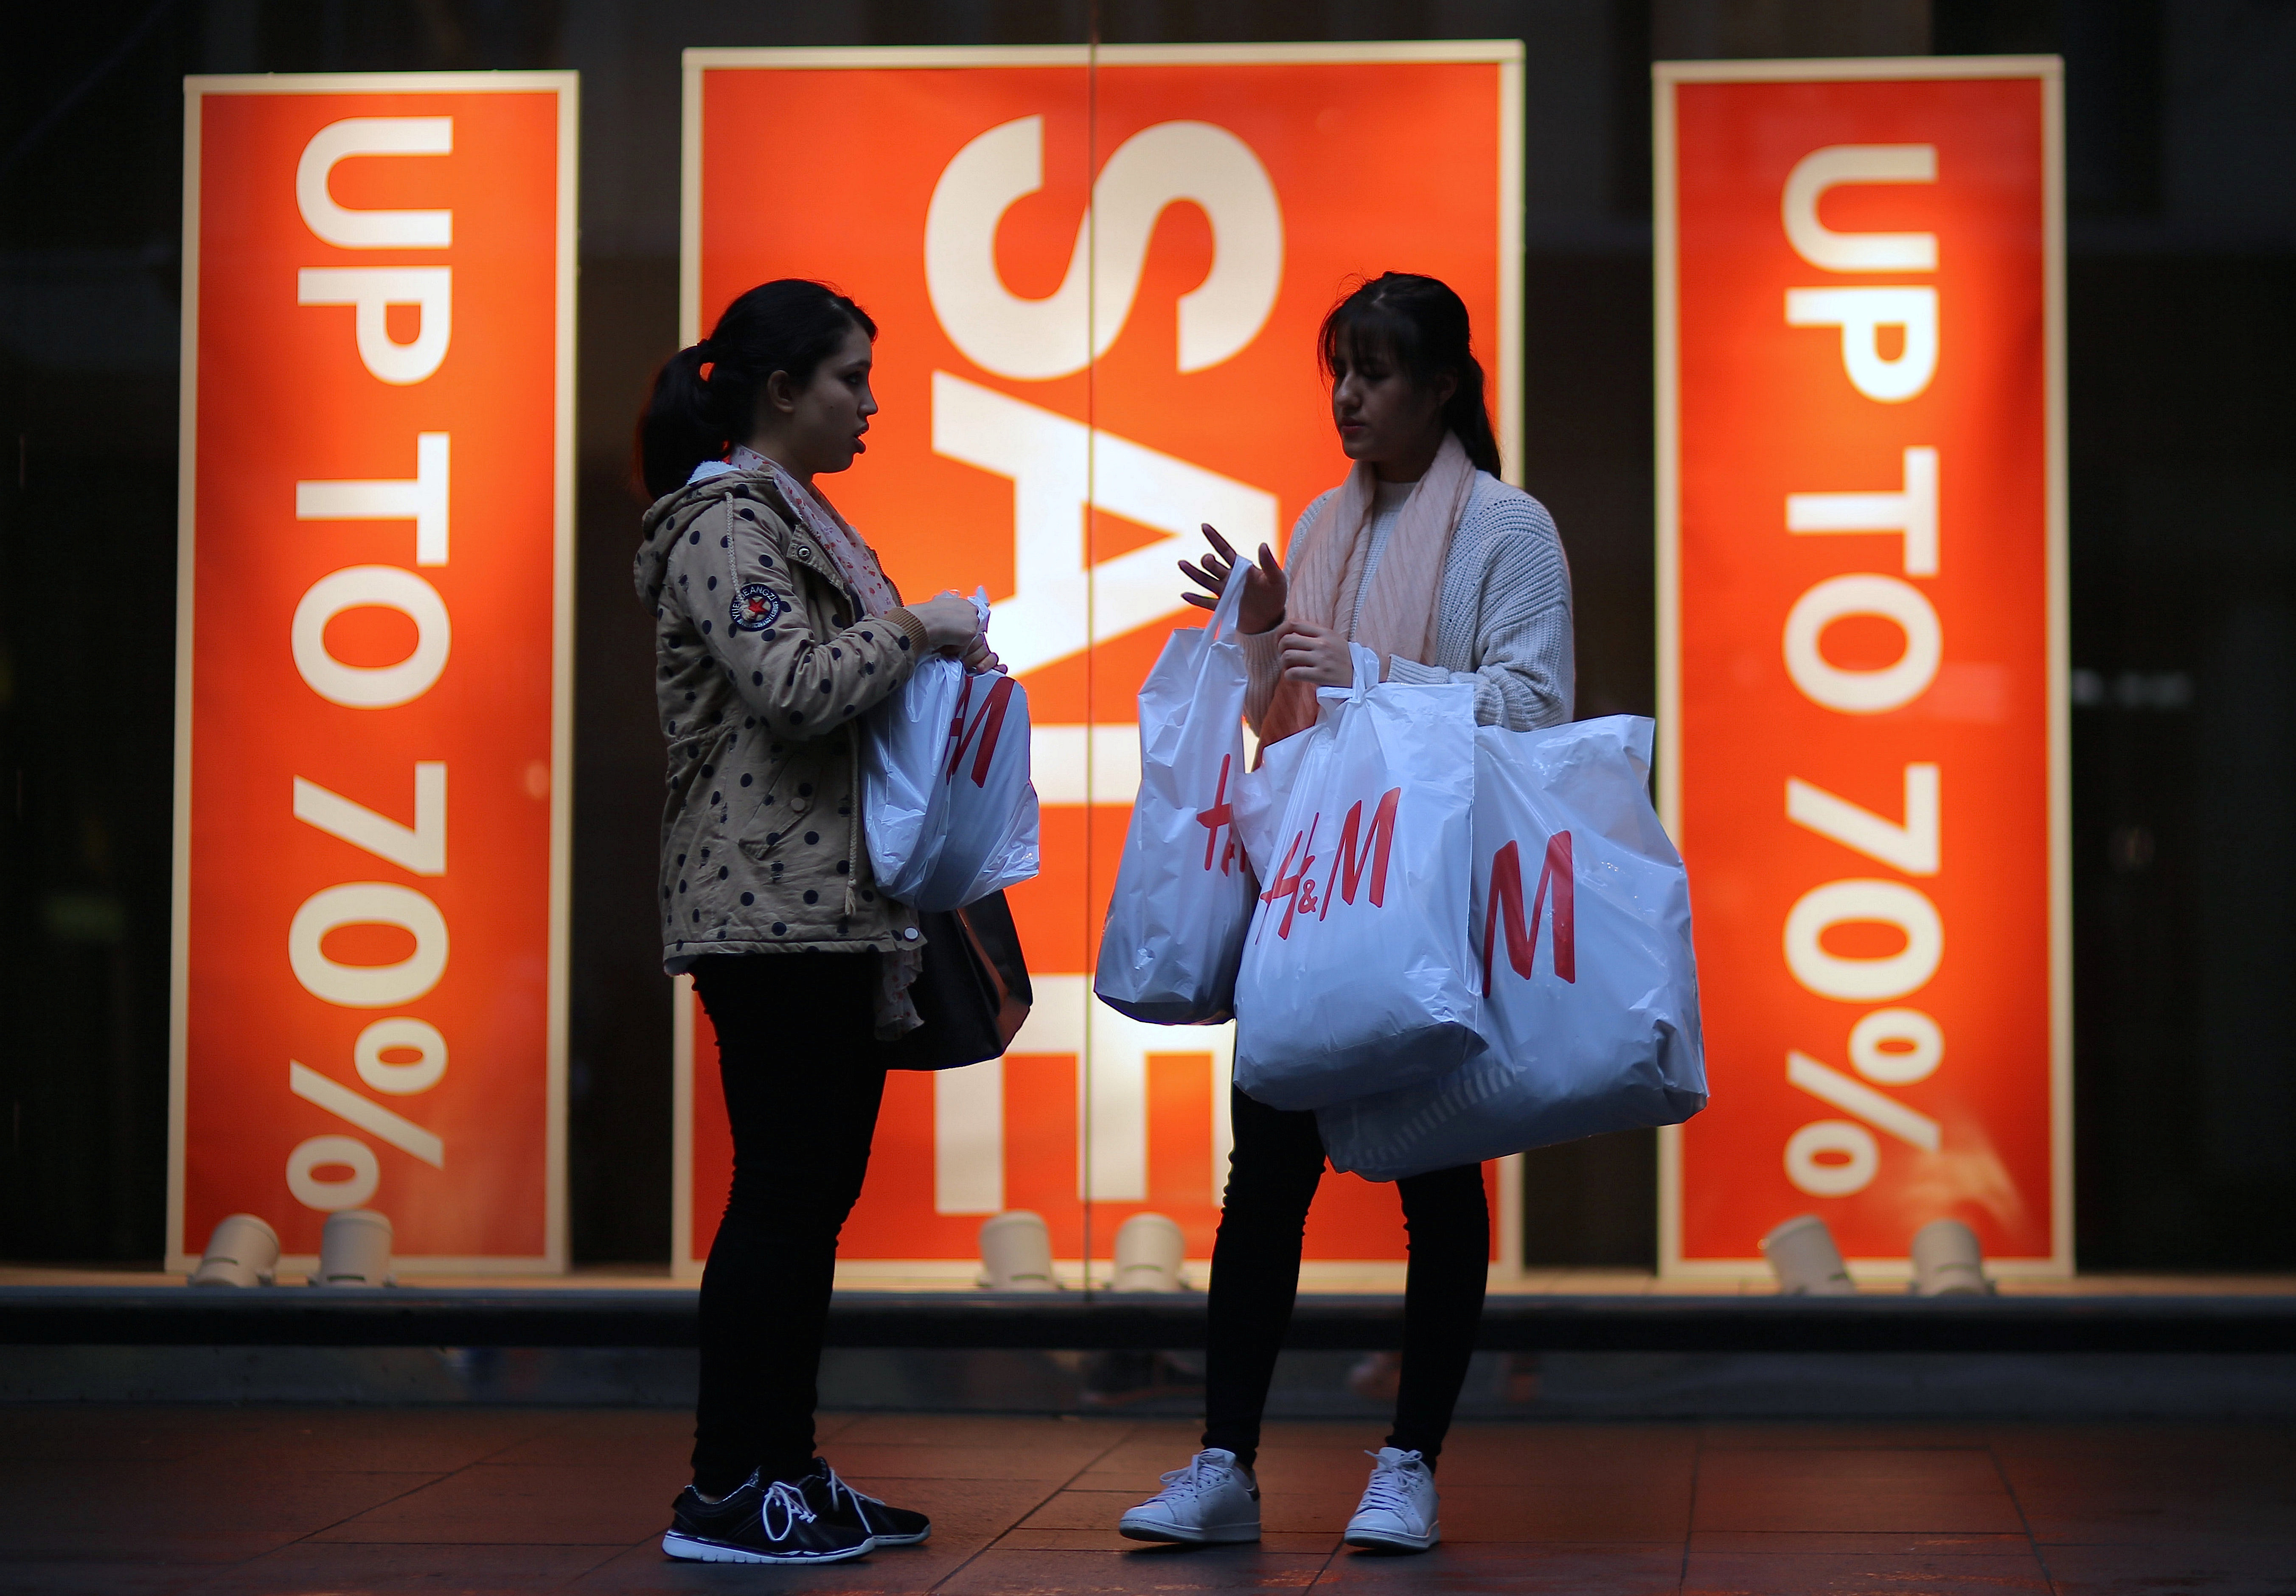 Shoppers carry shopping bags containing purchased goods outside a retail store displaying a sale sign in central Sydney, Australia, June 14, 2017. REUTERS/Steven Saphore